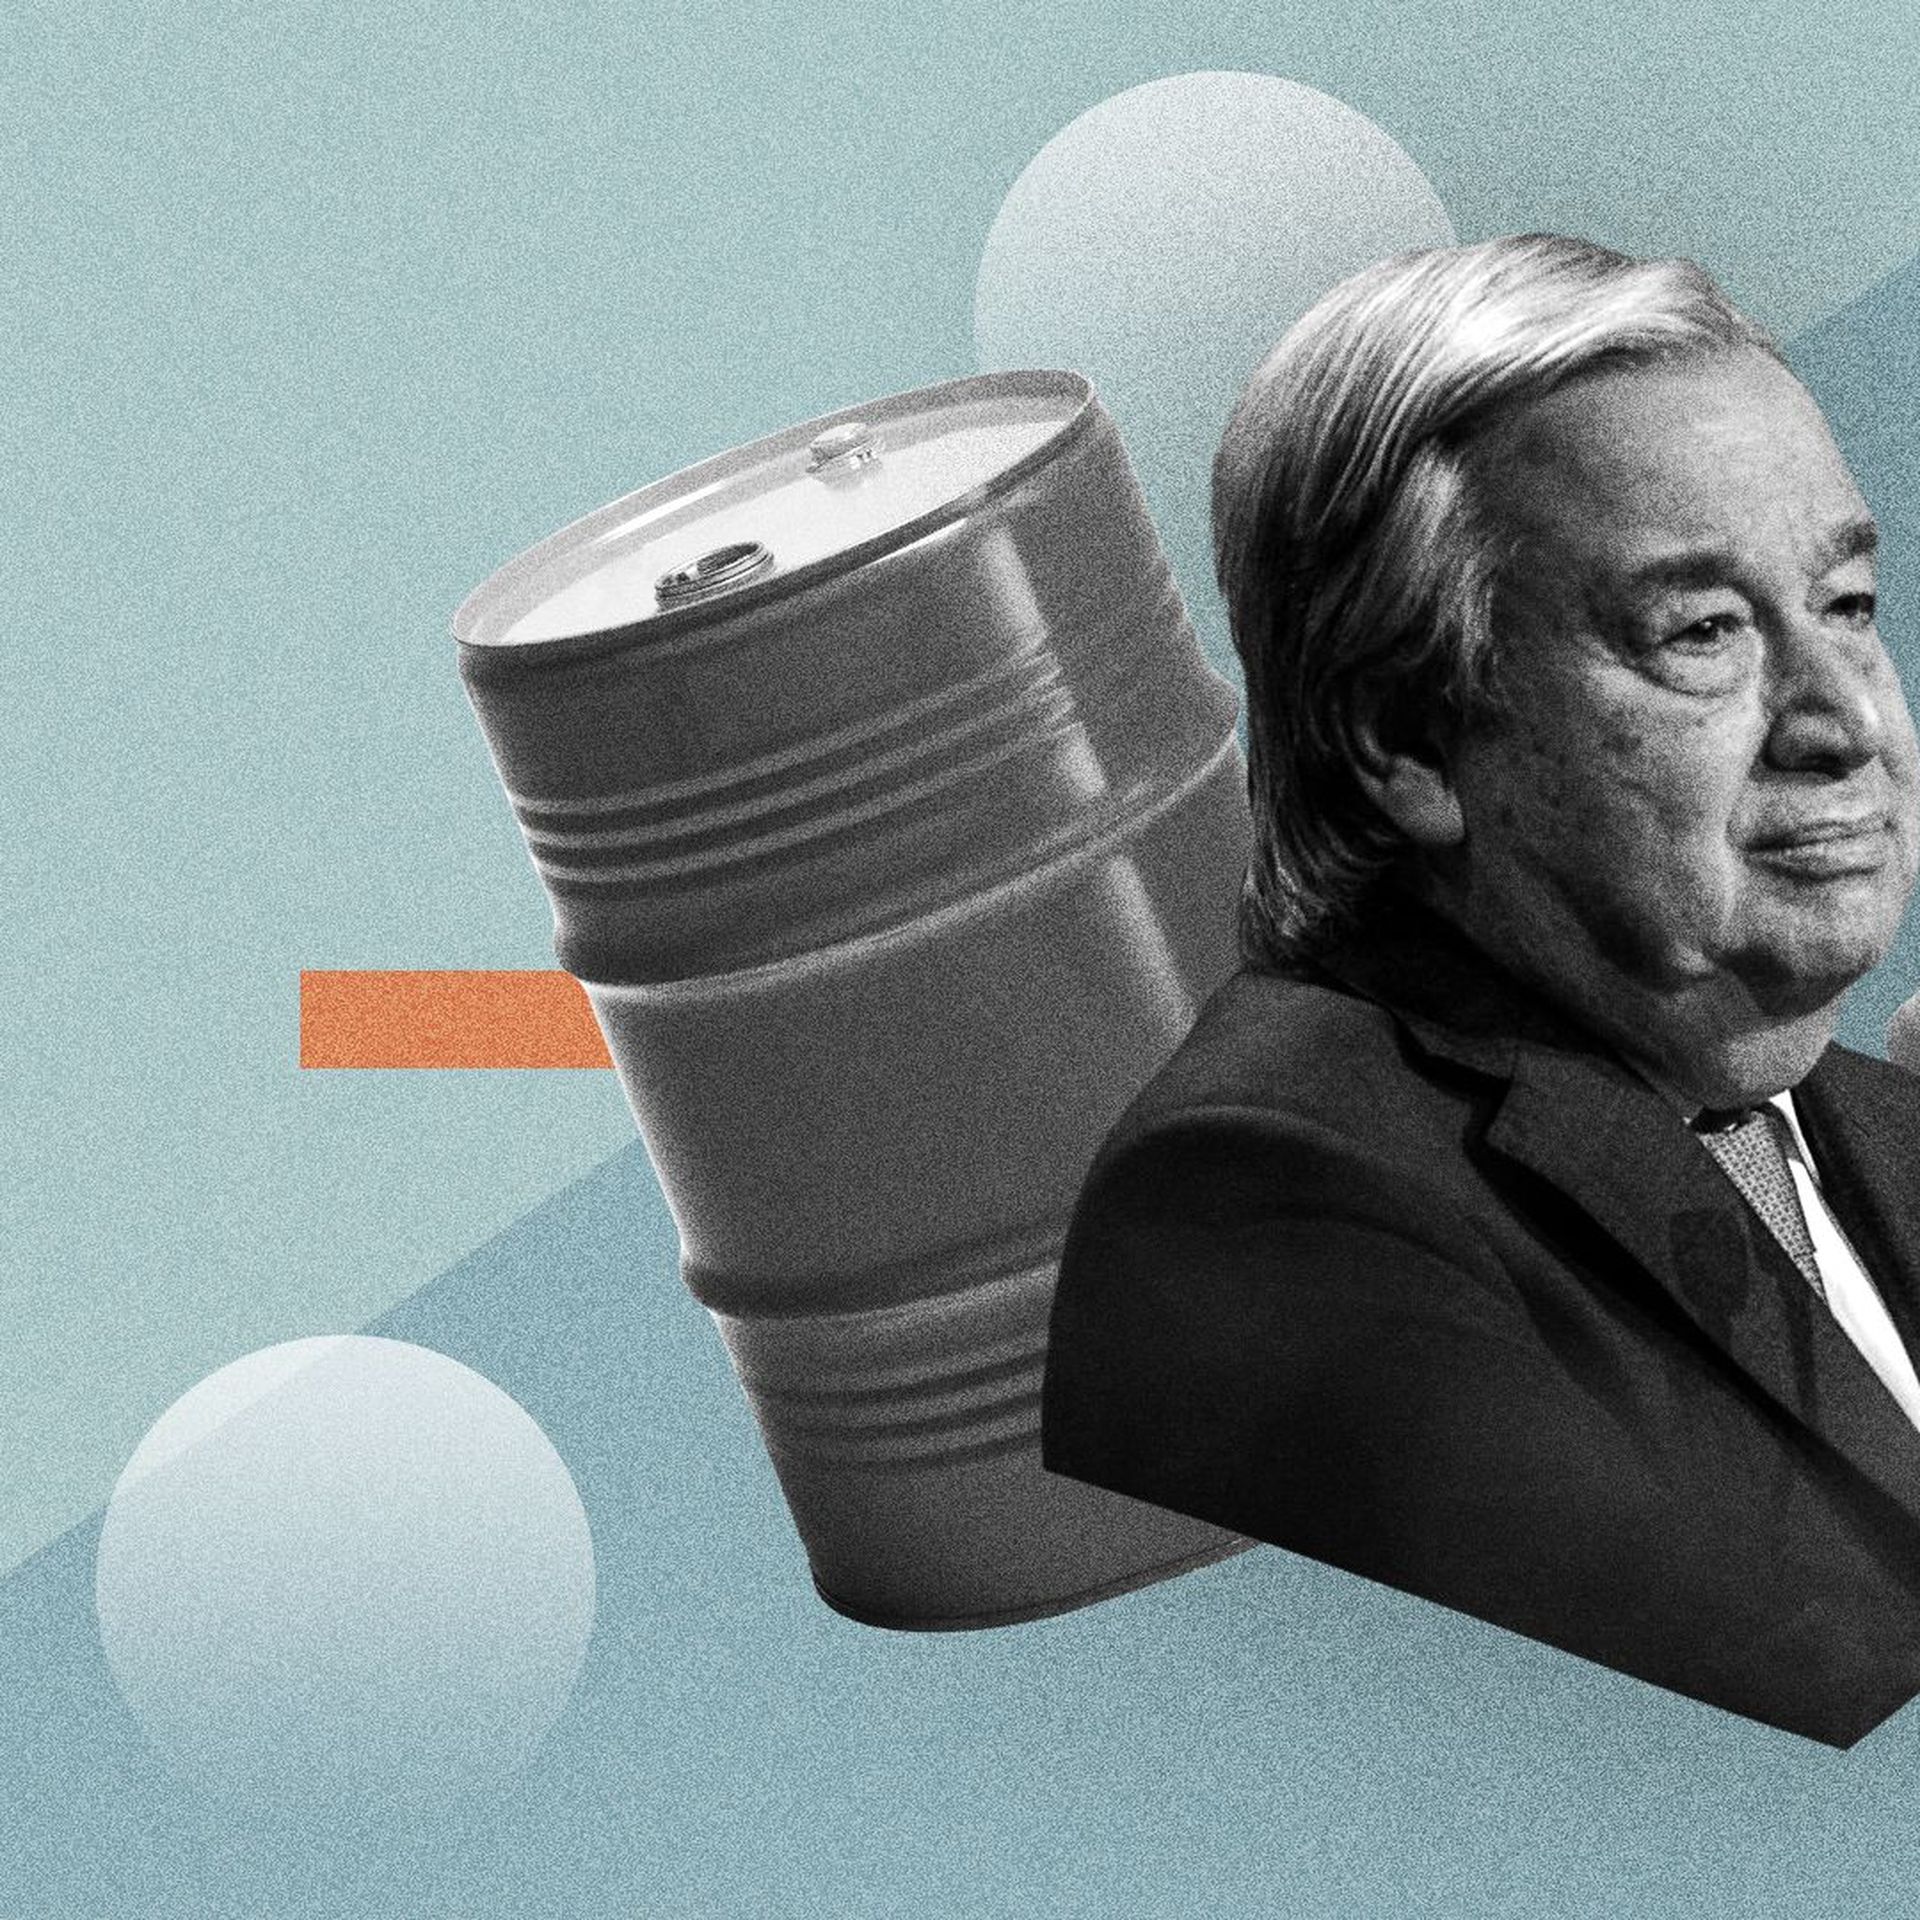 Photo illustration of UN Secretary General Antonio Guterres beside oil barrels with shapes in the background.